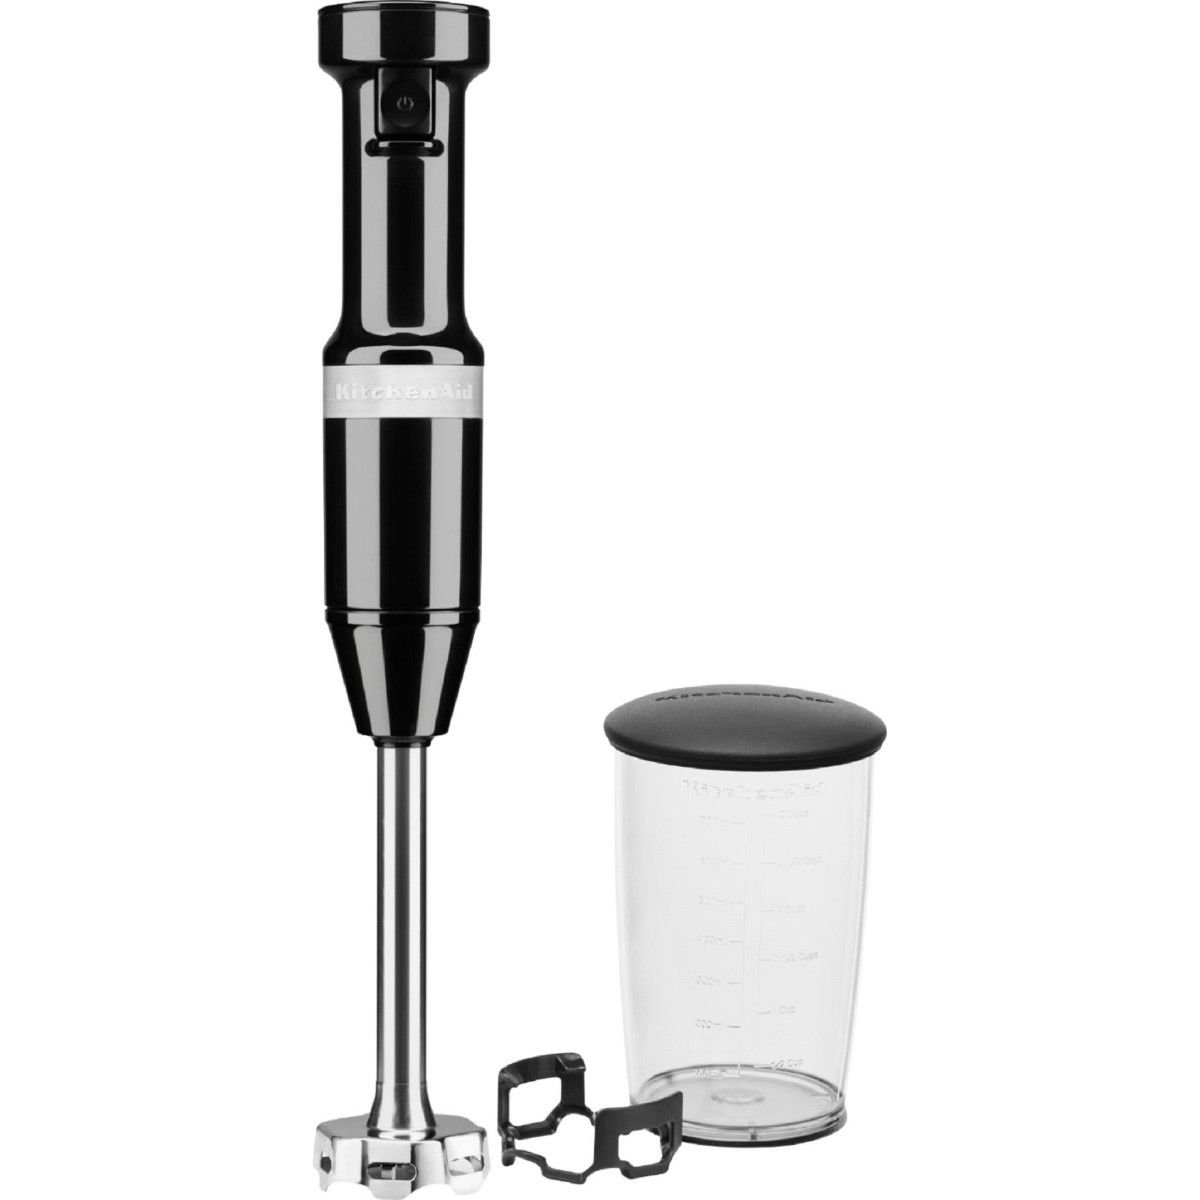 Kitchenaid Gourmet Pastry Blender in Black with Stainless Steel Blades 